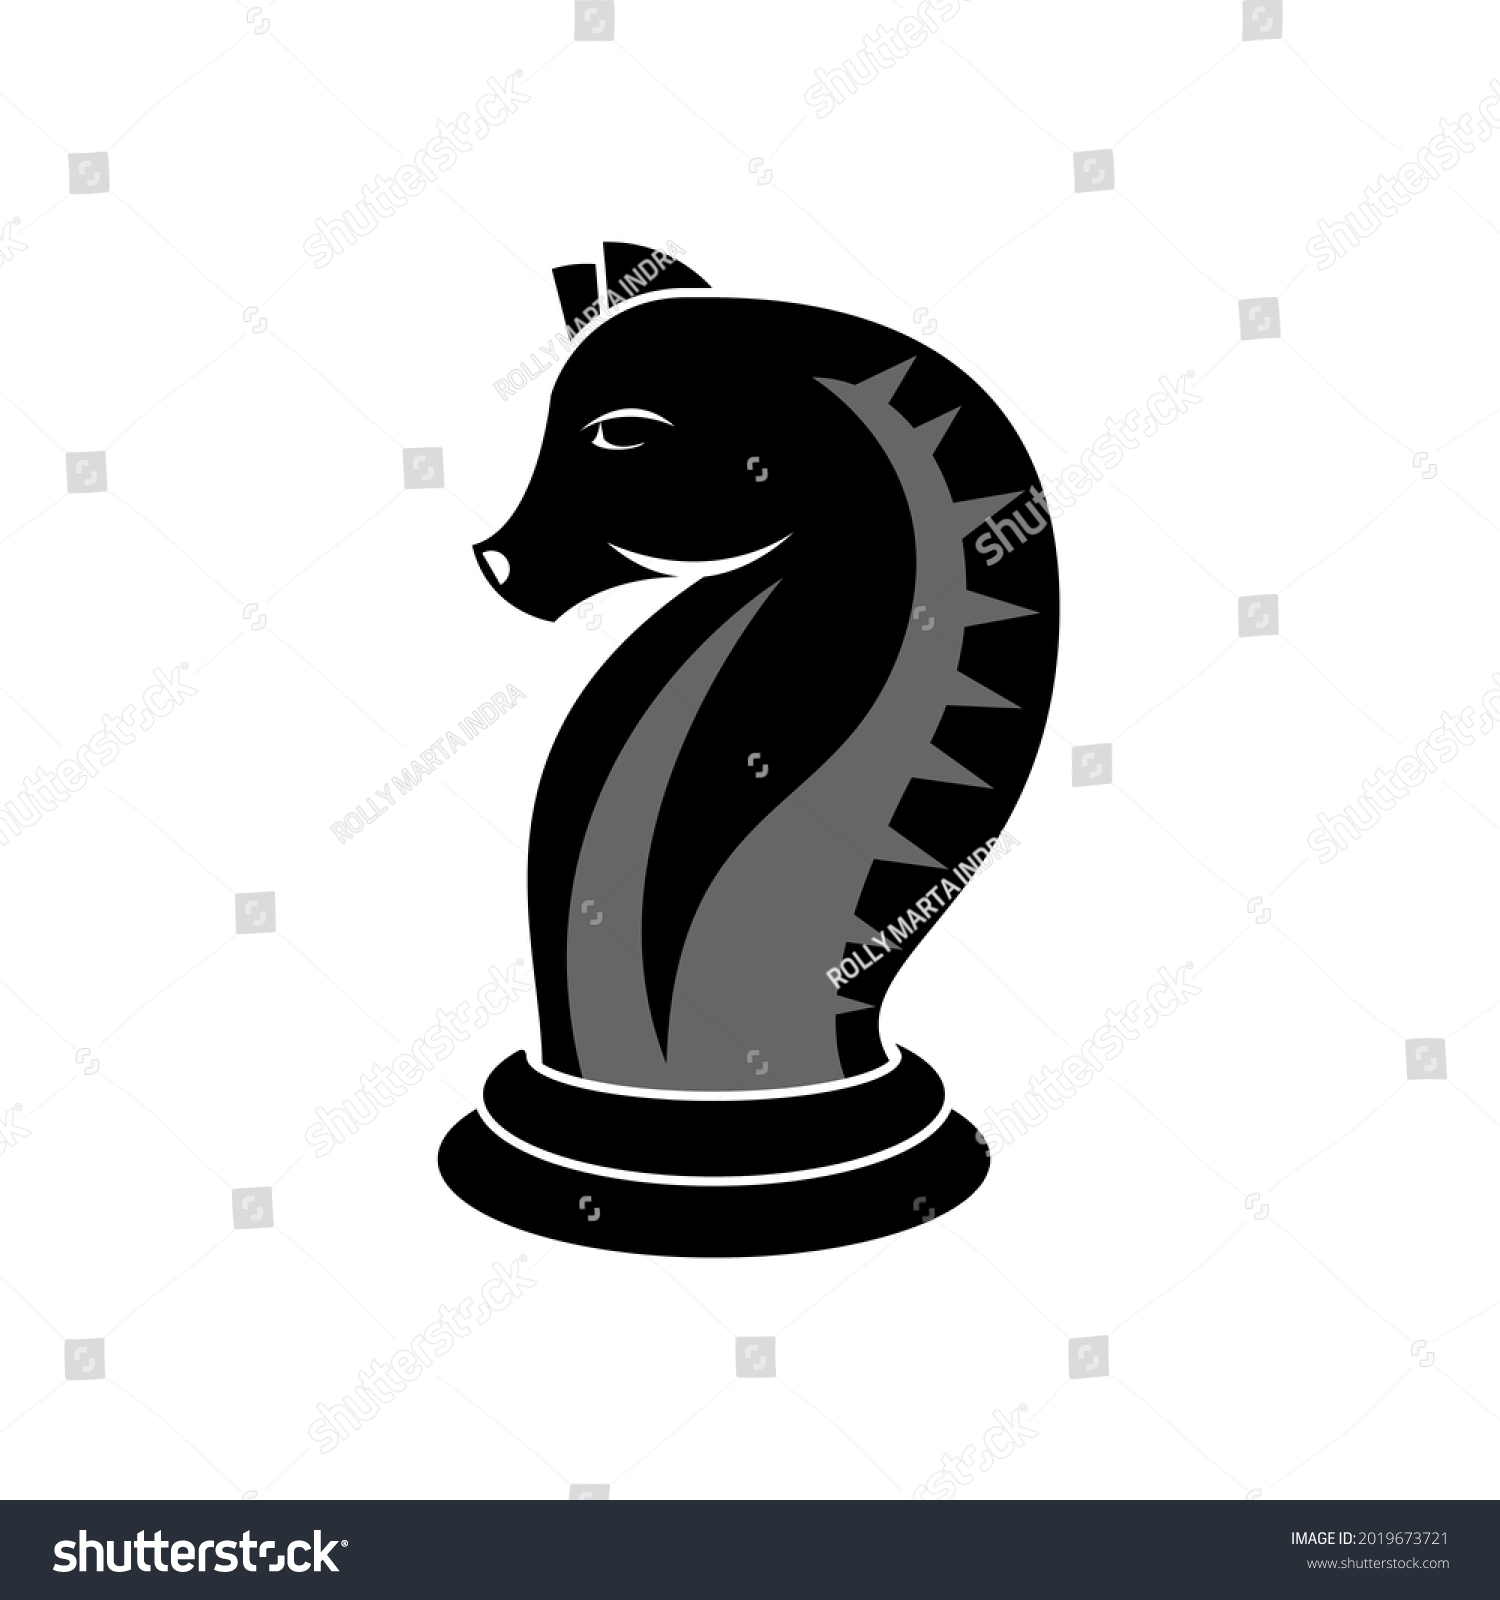 Chess. Vector illustration of a chess pawn. Kings, queens, rooks, ministers, horses and pawns. Isolated on a blank background, editable and changeable. #2019673721